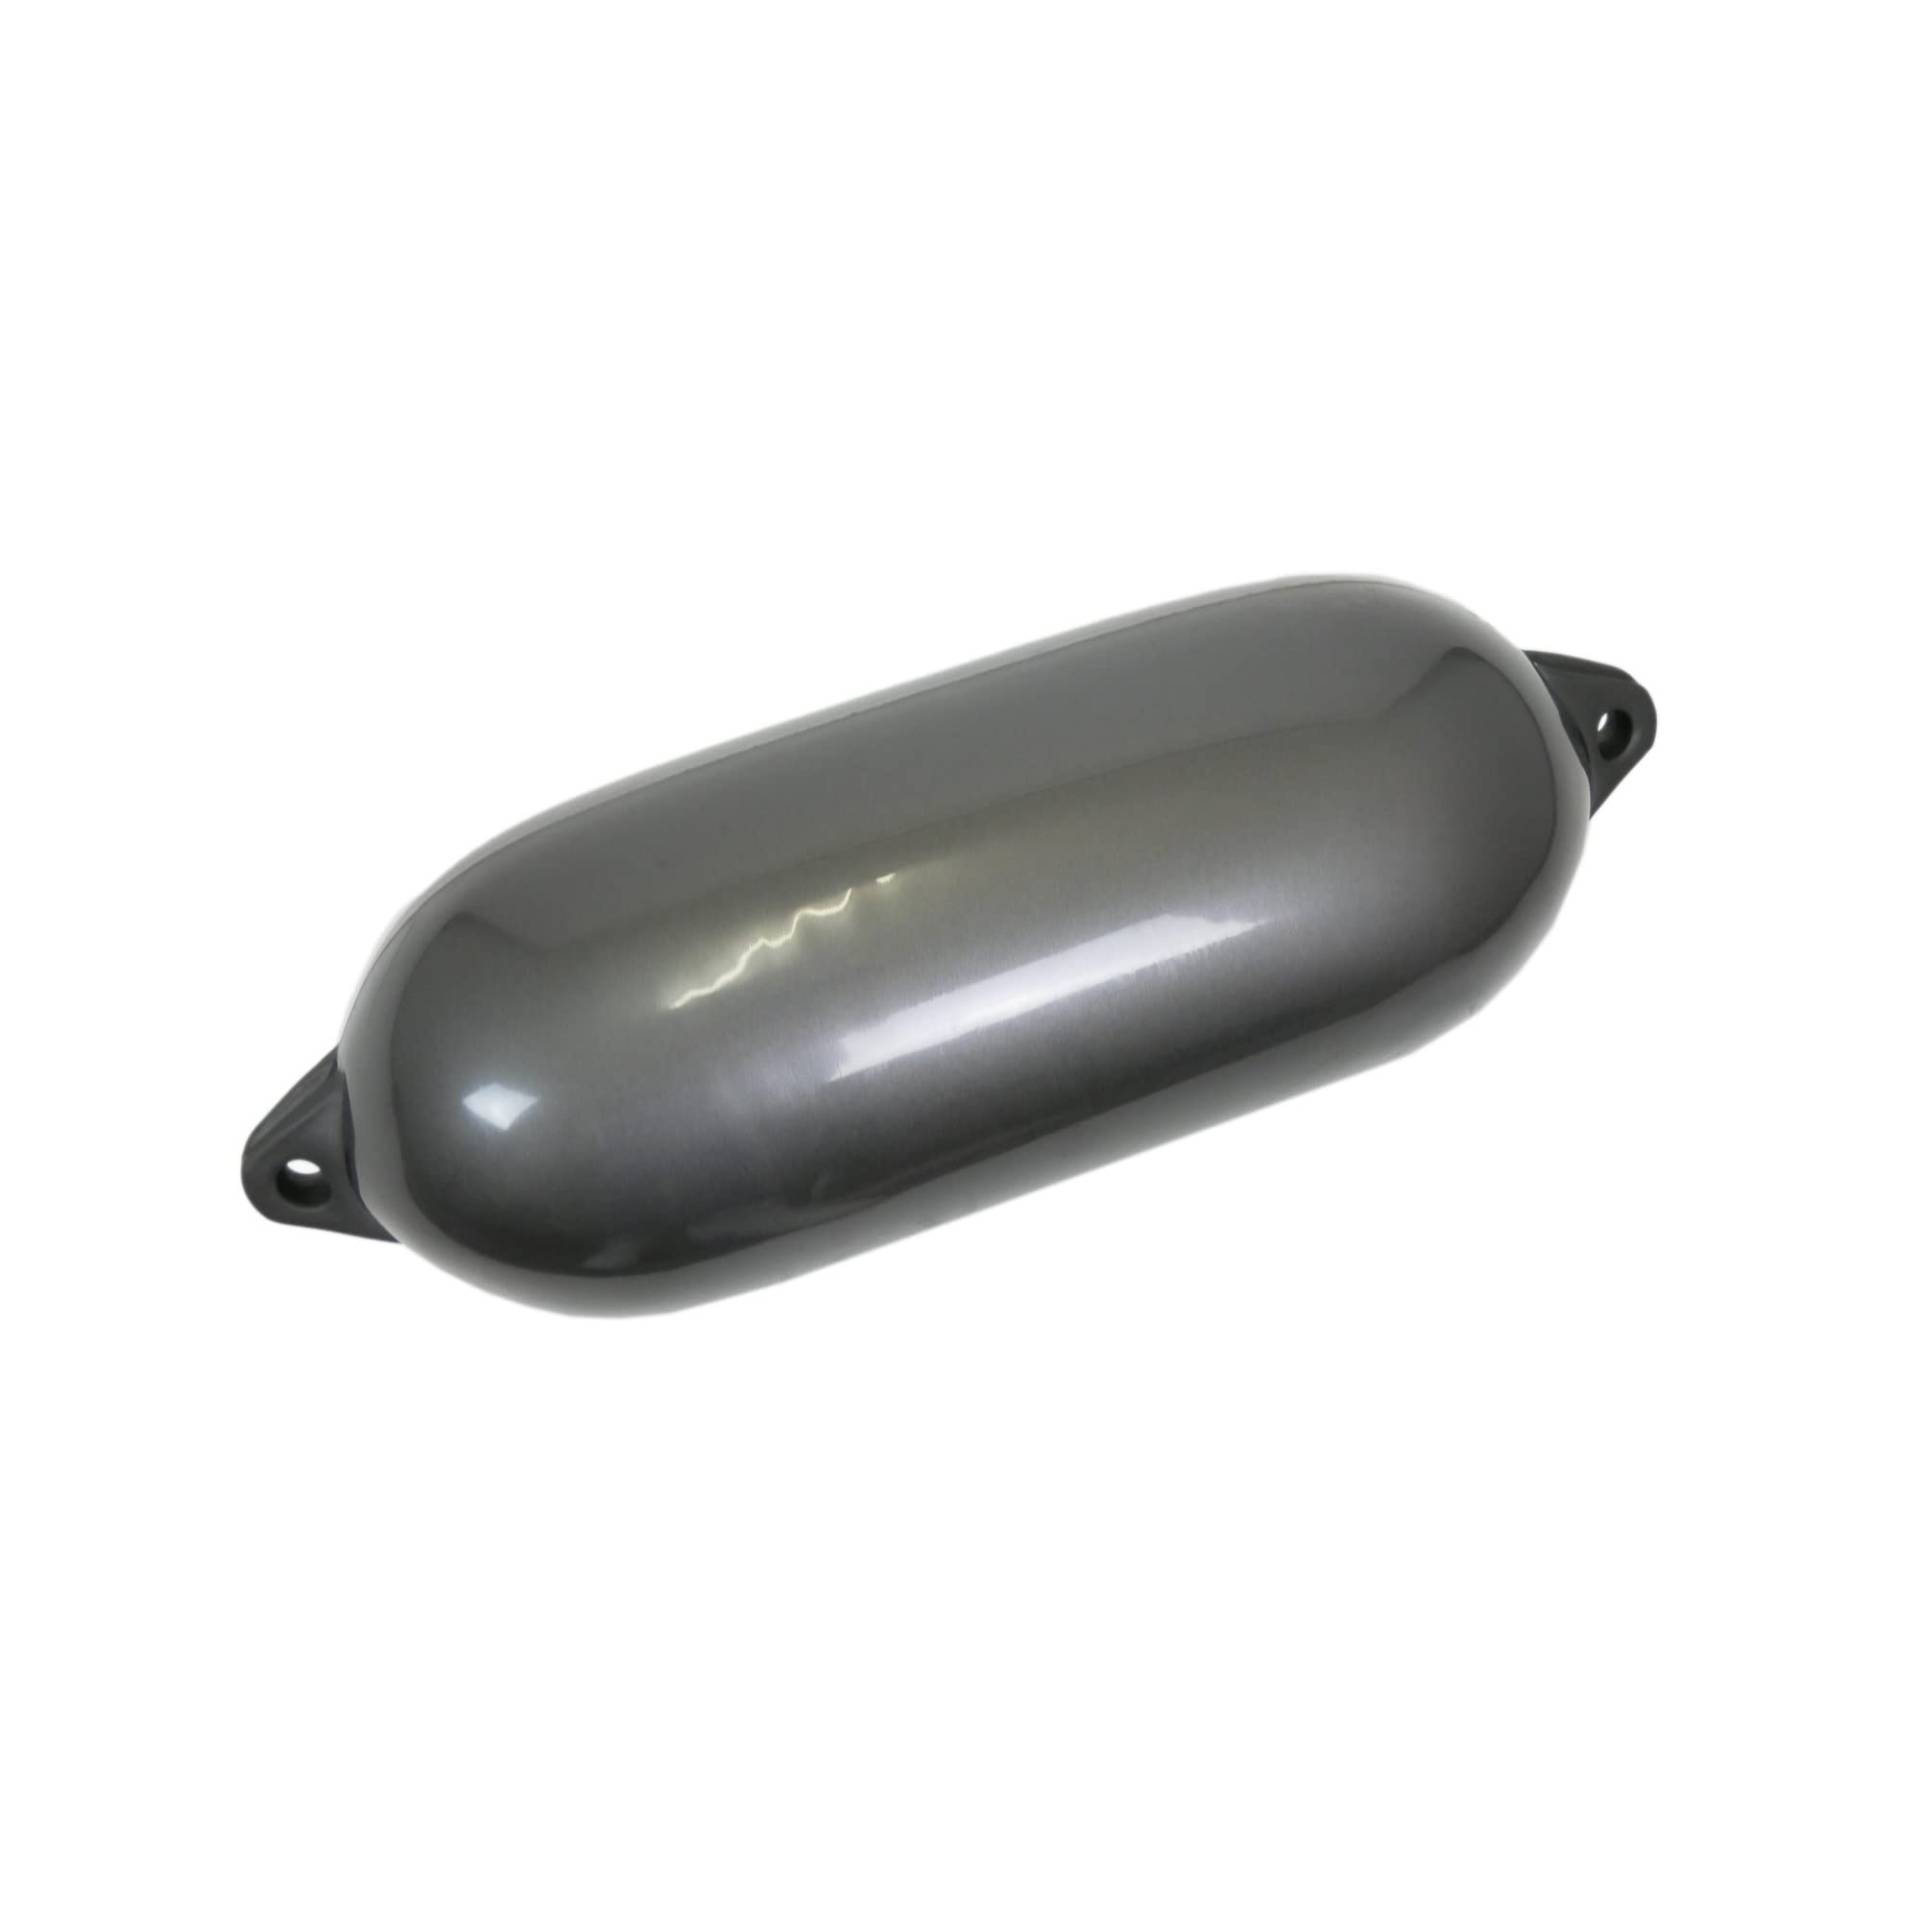 D&W The Motion Corporation Star-Fender 55 Silber 90X30CM von D&W The Motion Corporation